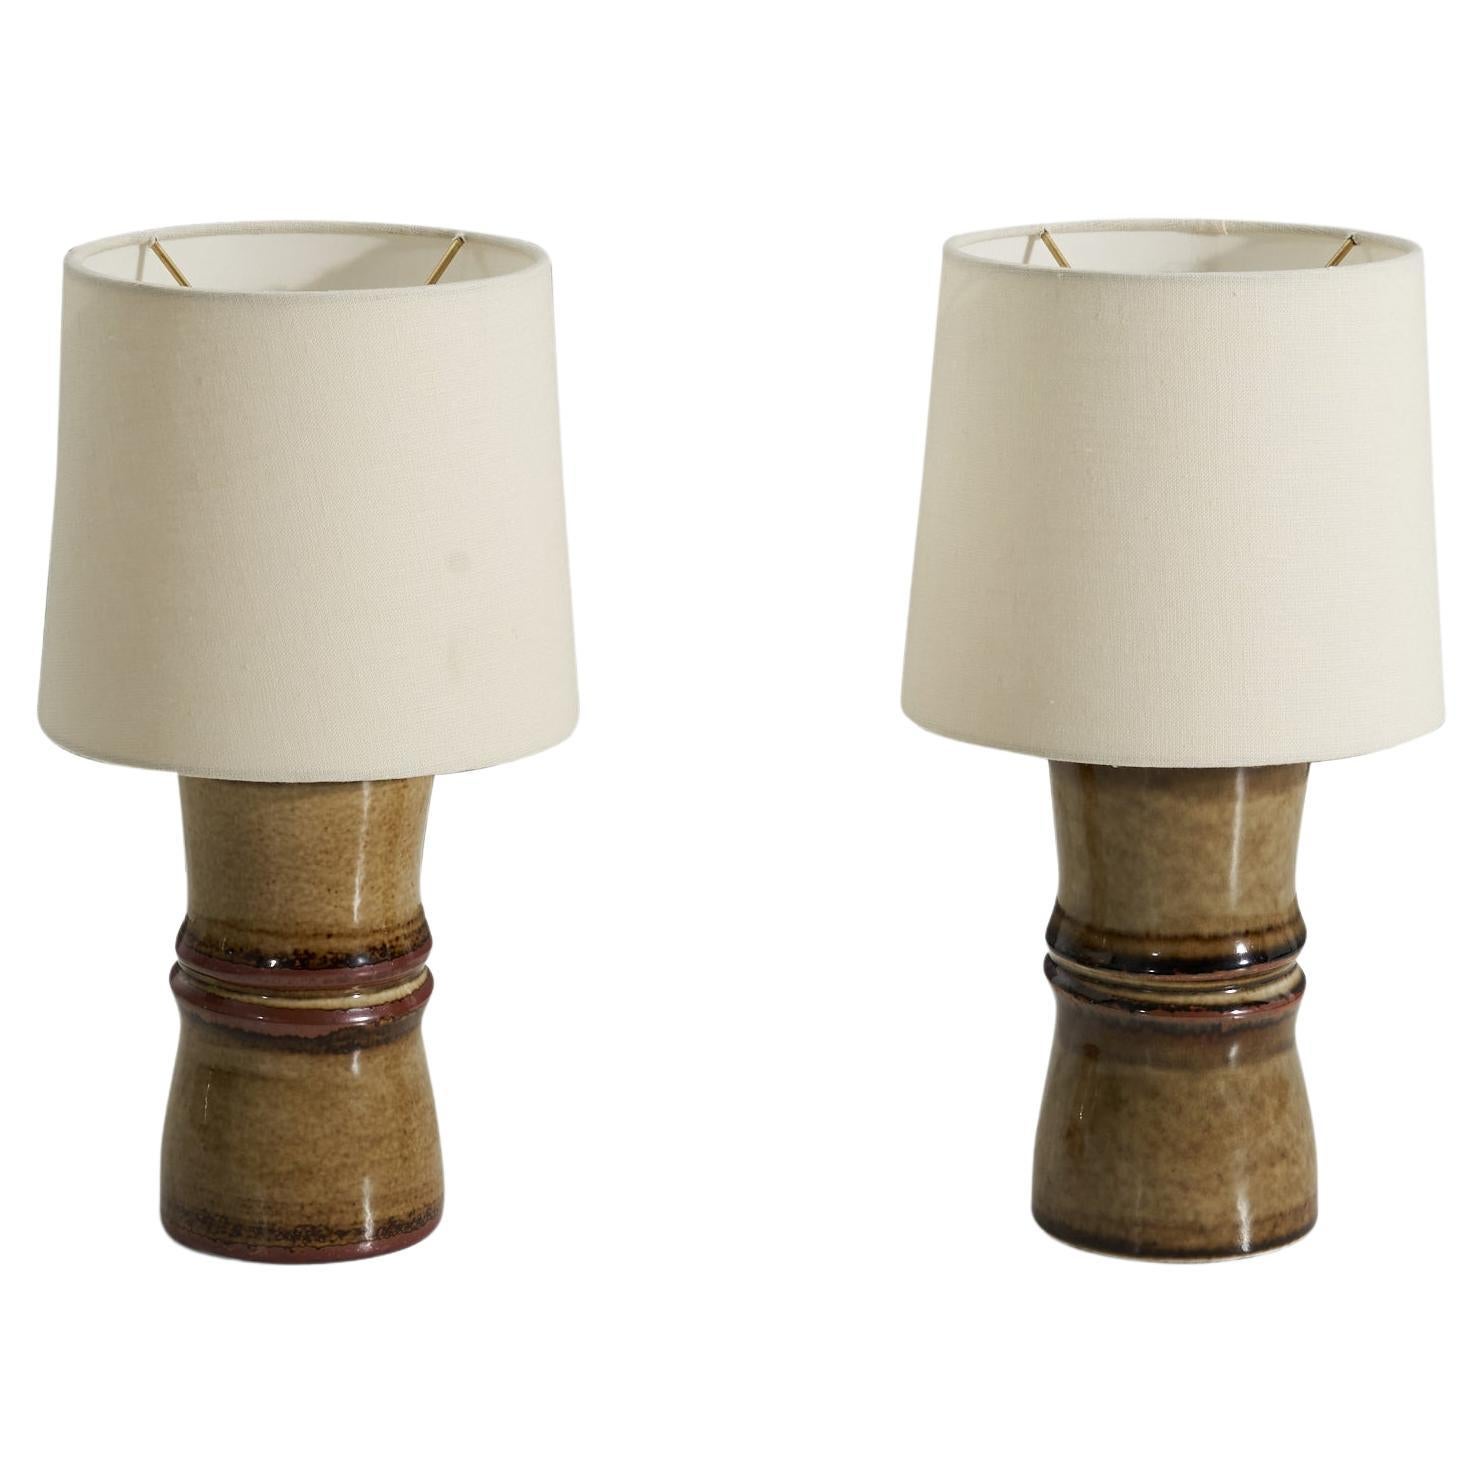 A pair of yellow-brown glazed stoneware table lamps, designed by Olle Alberius and produced by Rörstrand, Sweden, 1960s. 

Sold without lampshades. Measurements listed are of lamps without shades.
For reference:
Measurements of shade (inches) :